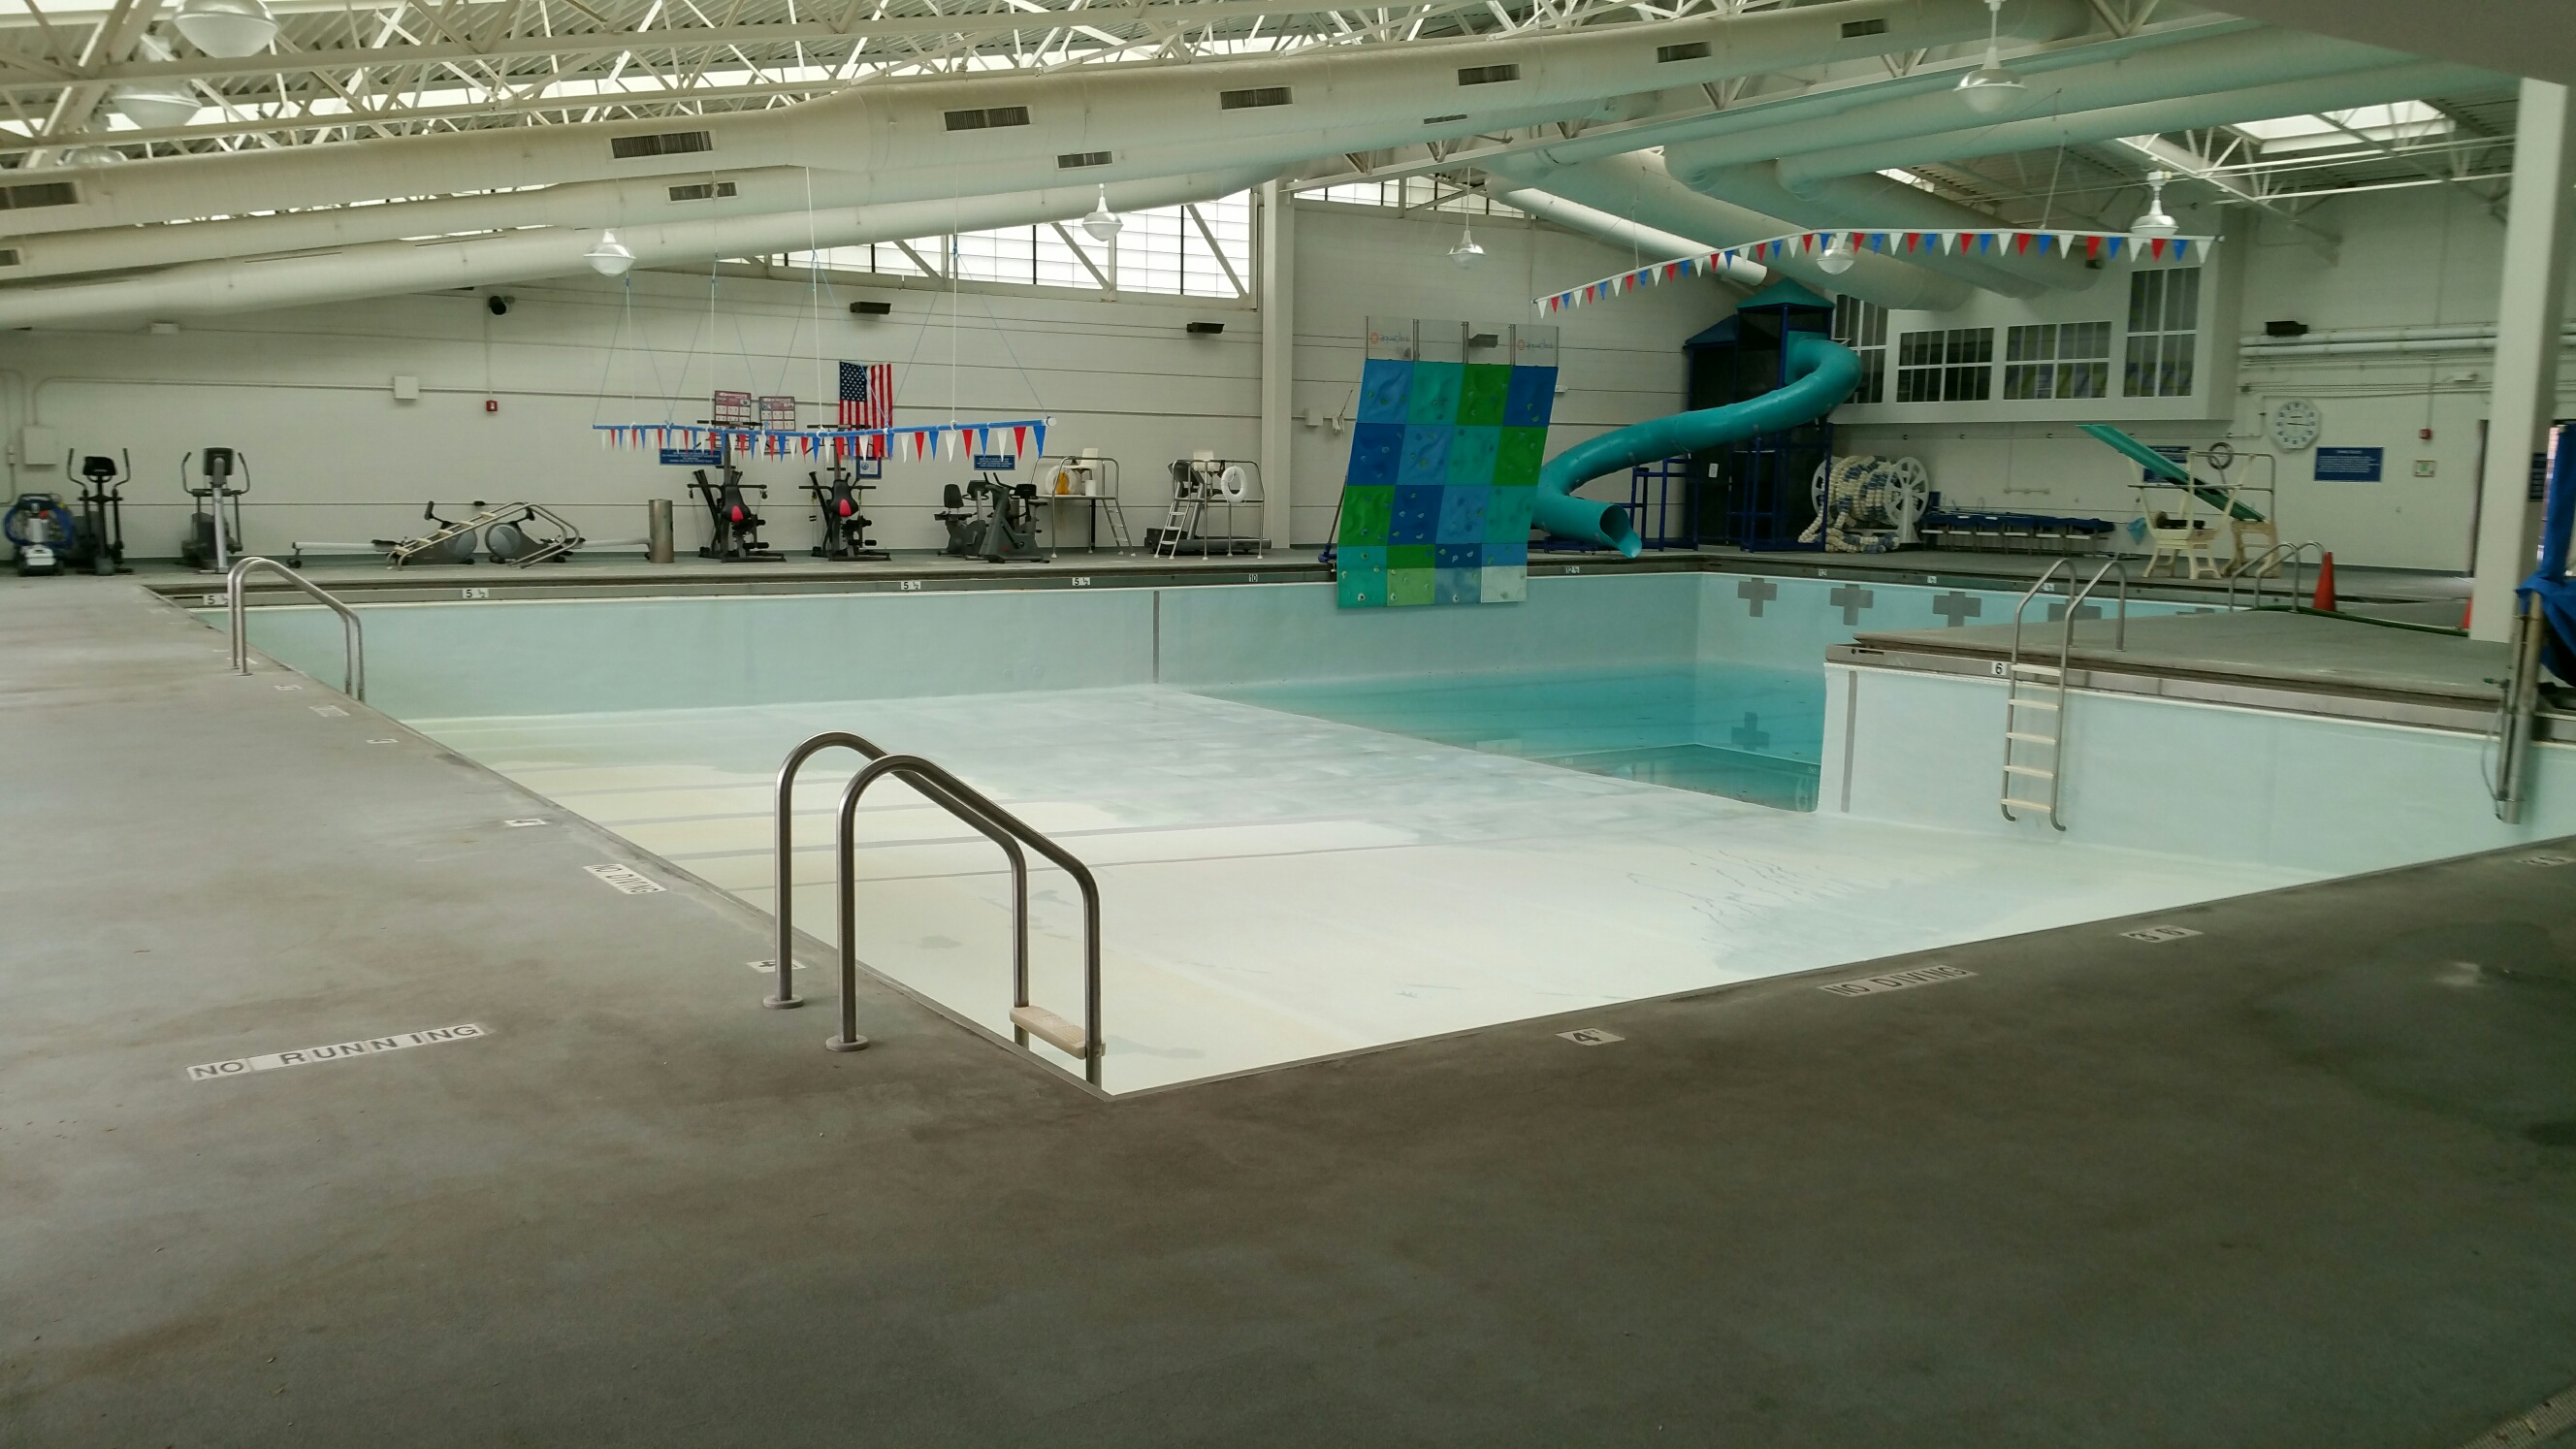 peterson air force base pool